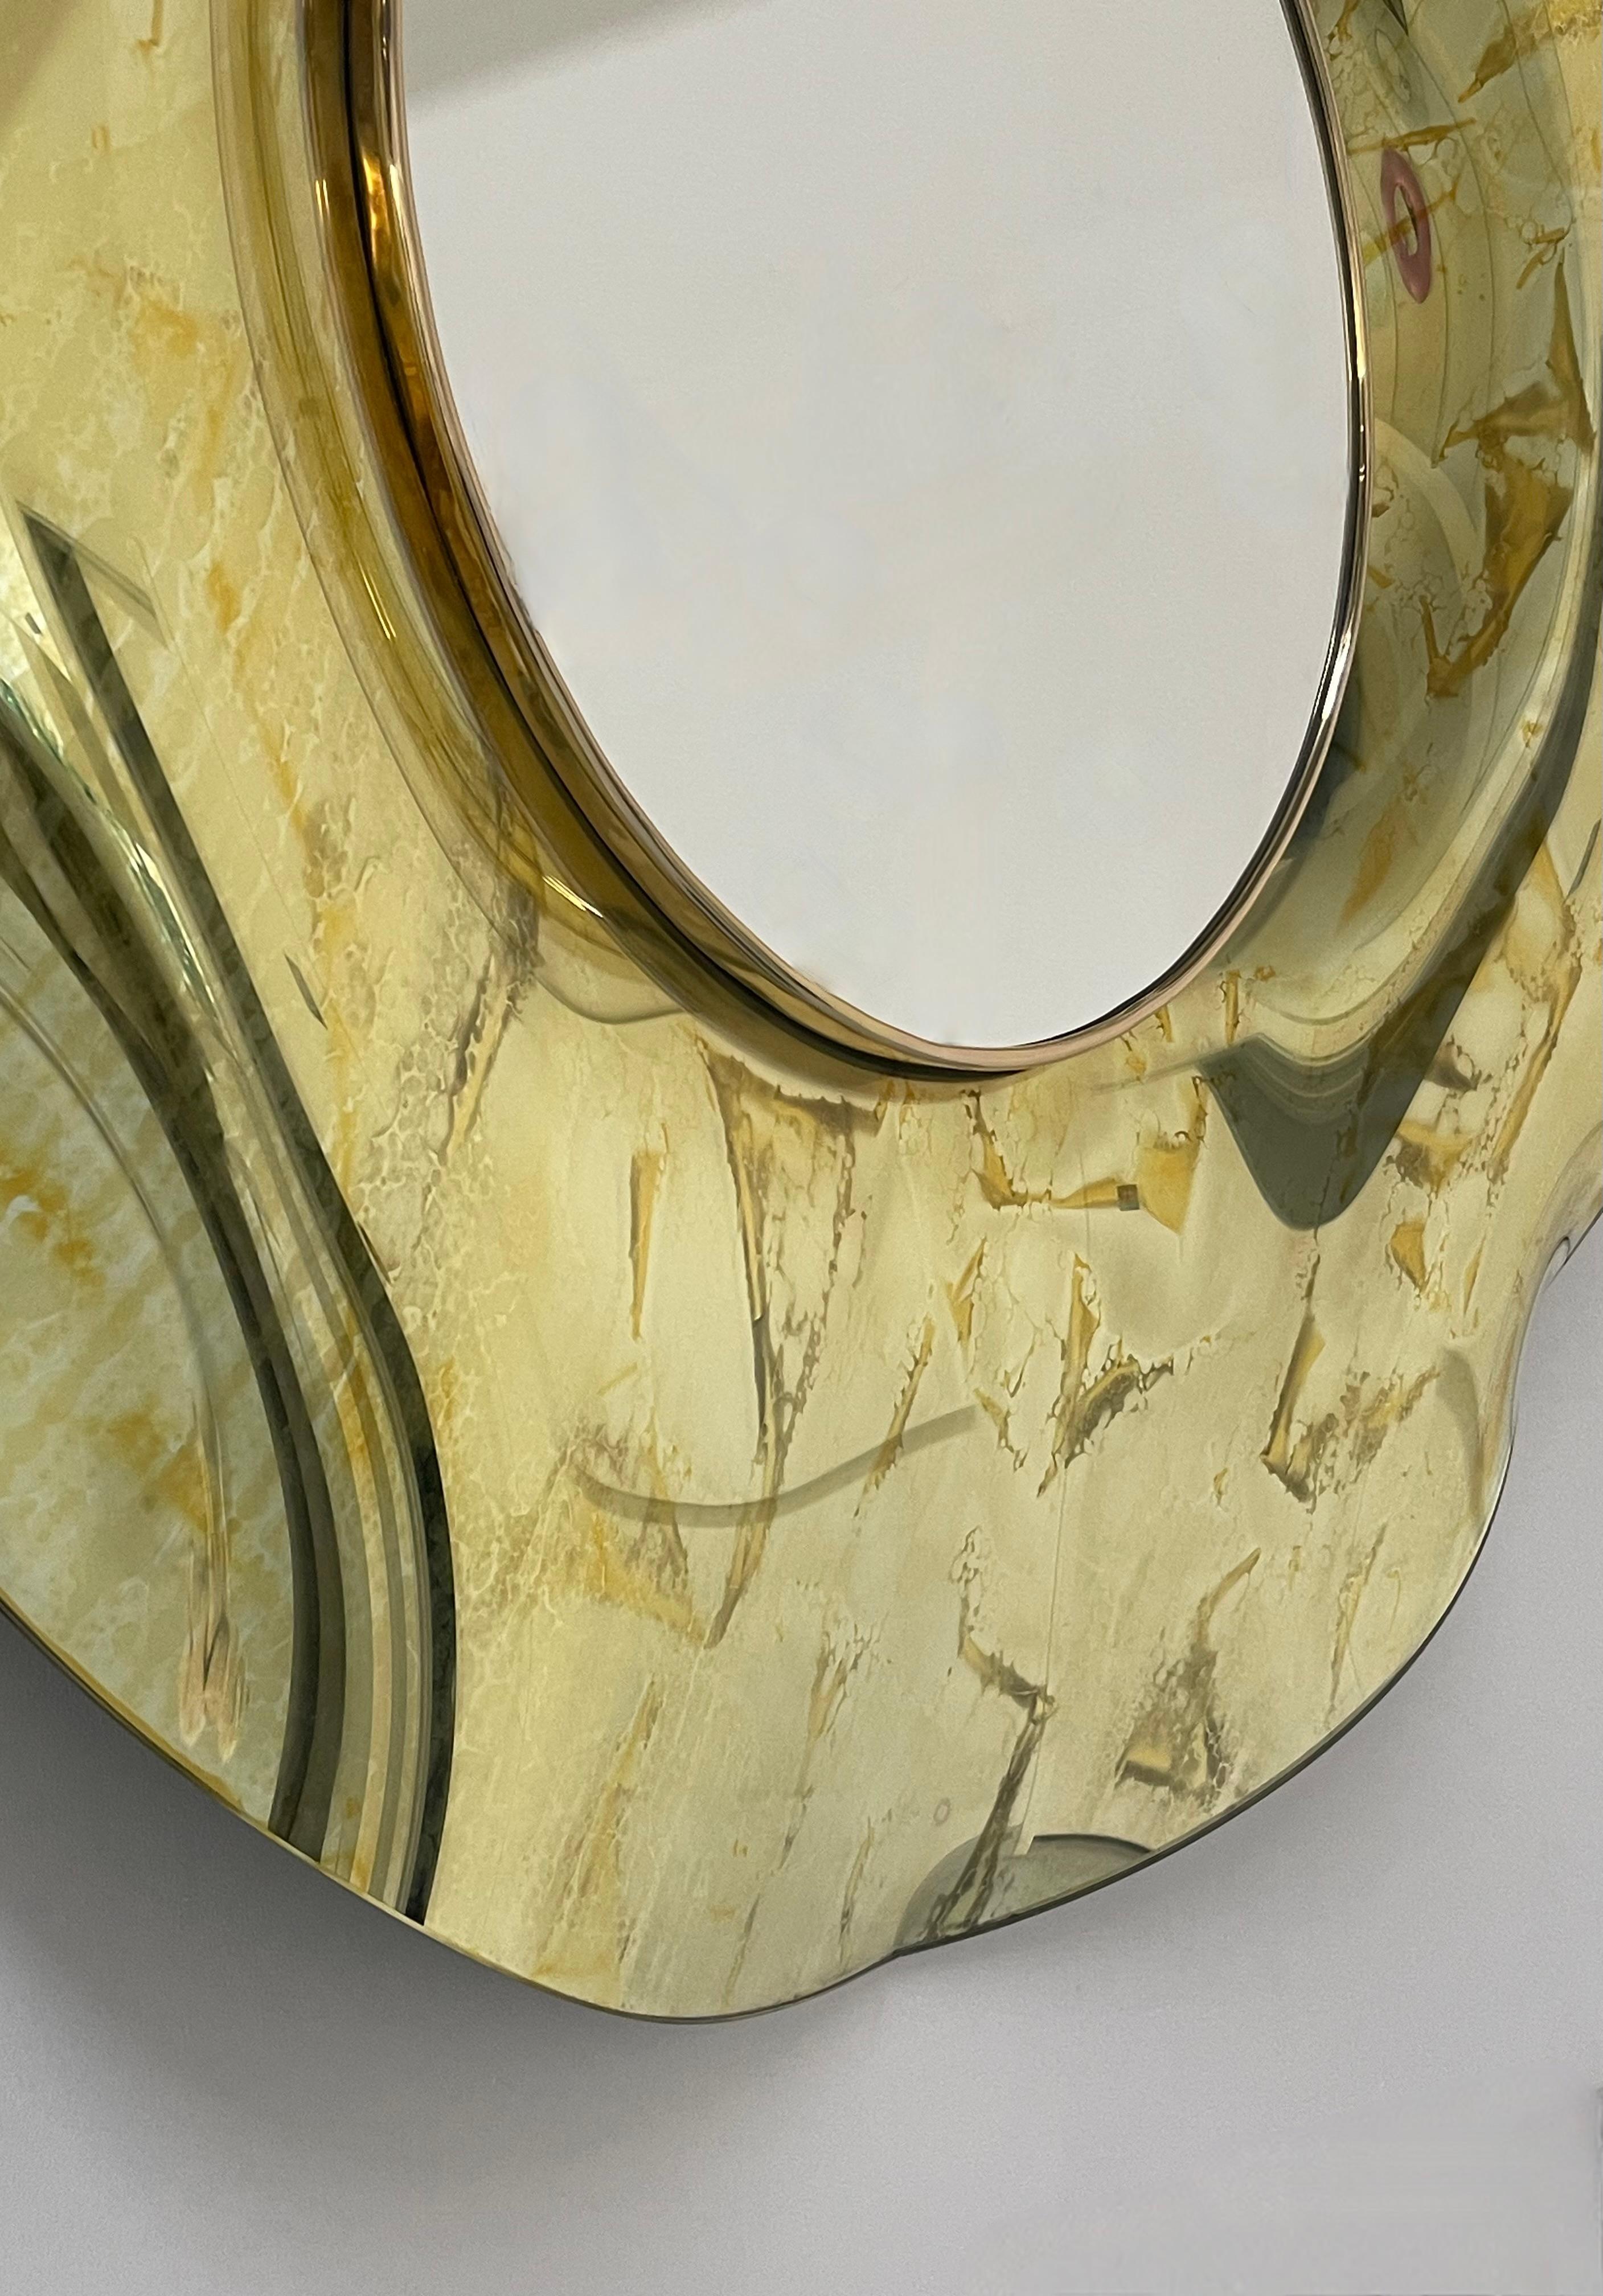 Modern Contemporary 'Undulate' Handmade Gold Crystal Mirror Dia. 40'' by Ghiró Studio For Sale